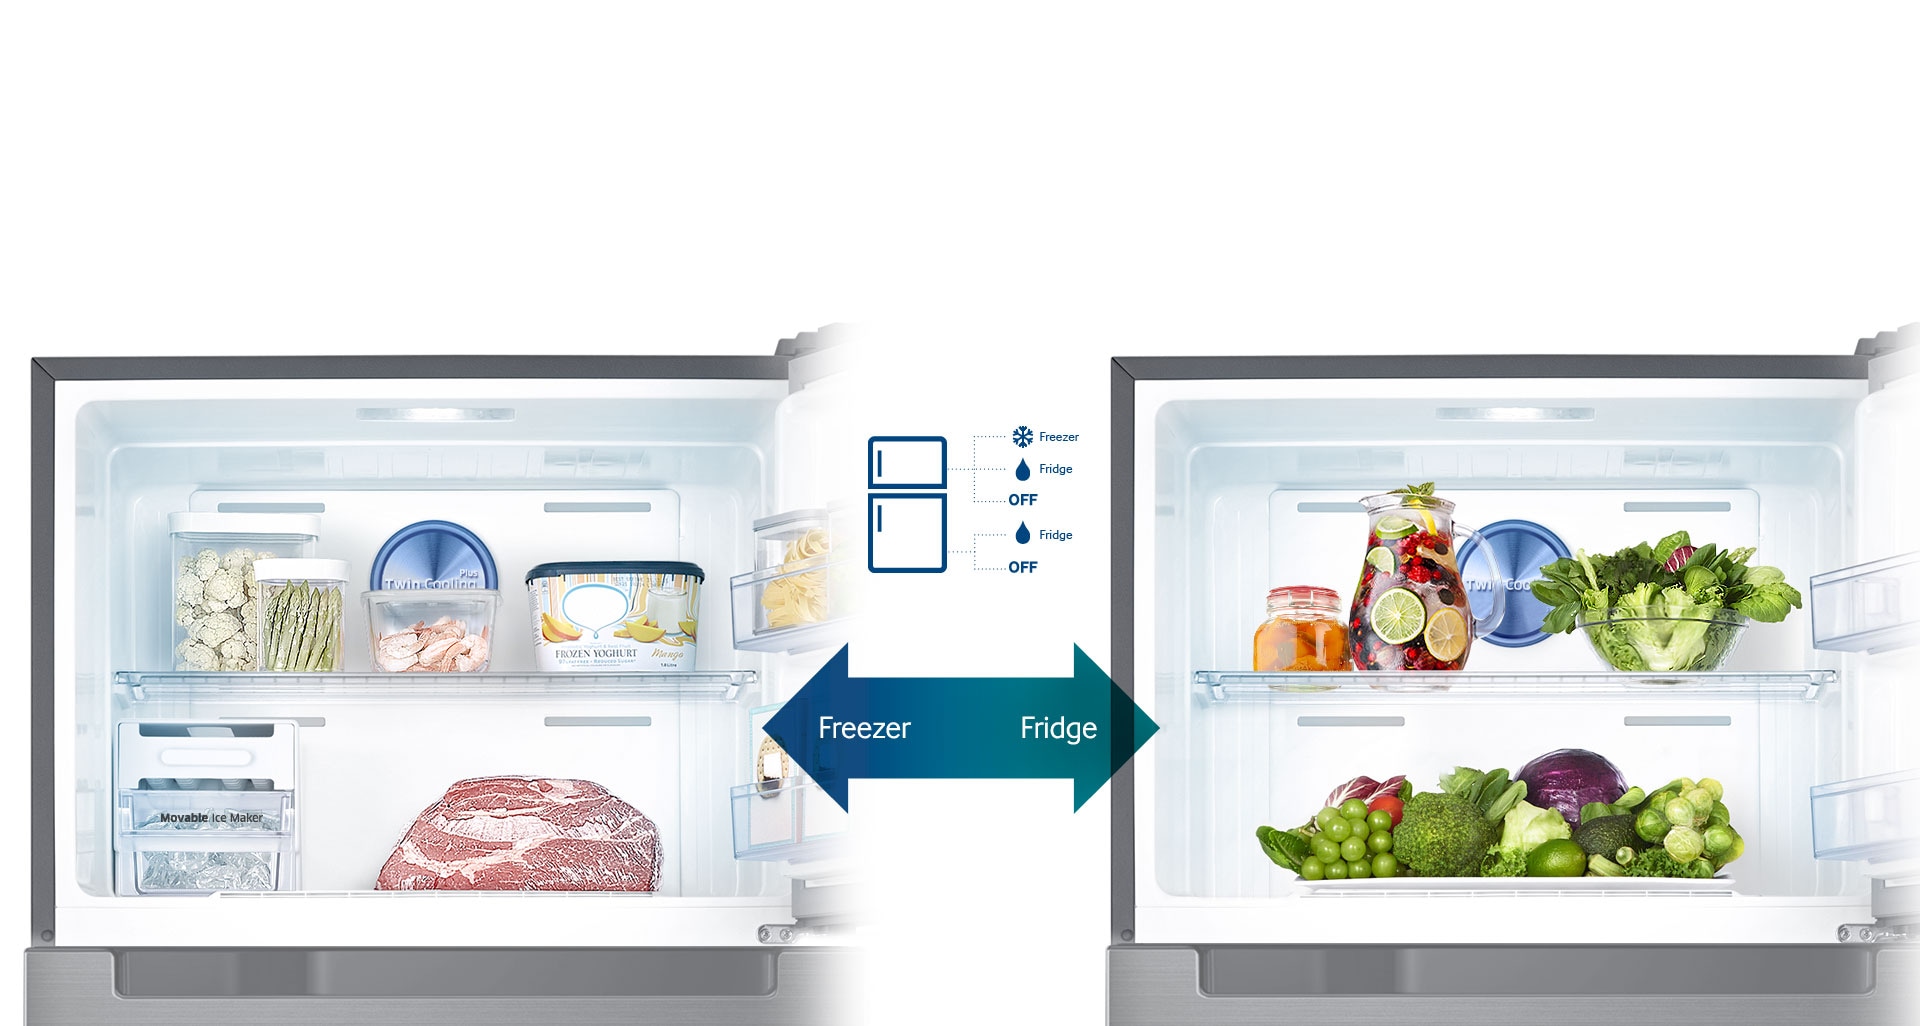 Samsung Twin Cooling Plus Top Freezer Fridge – an image showing 5 possible Conversion Modes for flexible storage